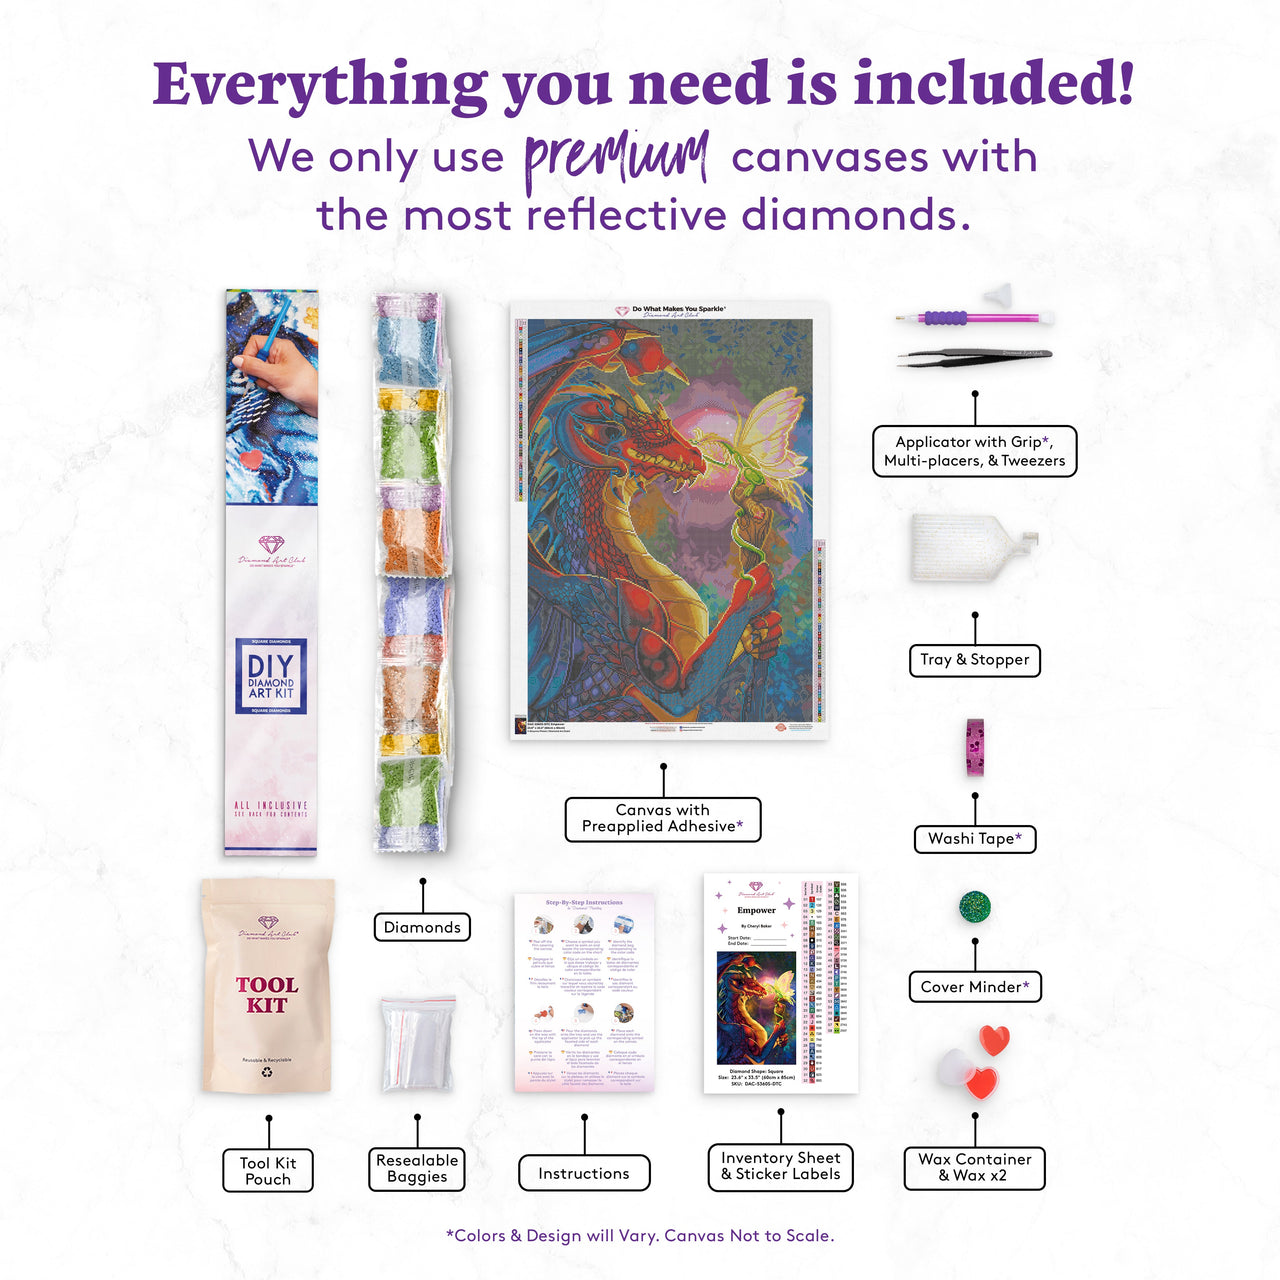 Diamond Painting Empower 23.6" x 33.5" (60cm x 85cm) / Square With 58 Colors Including 4 ABs and 2 Fairy Dust Diamonds / 82,181